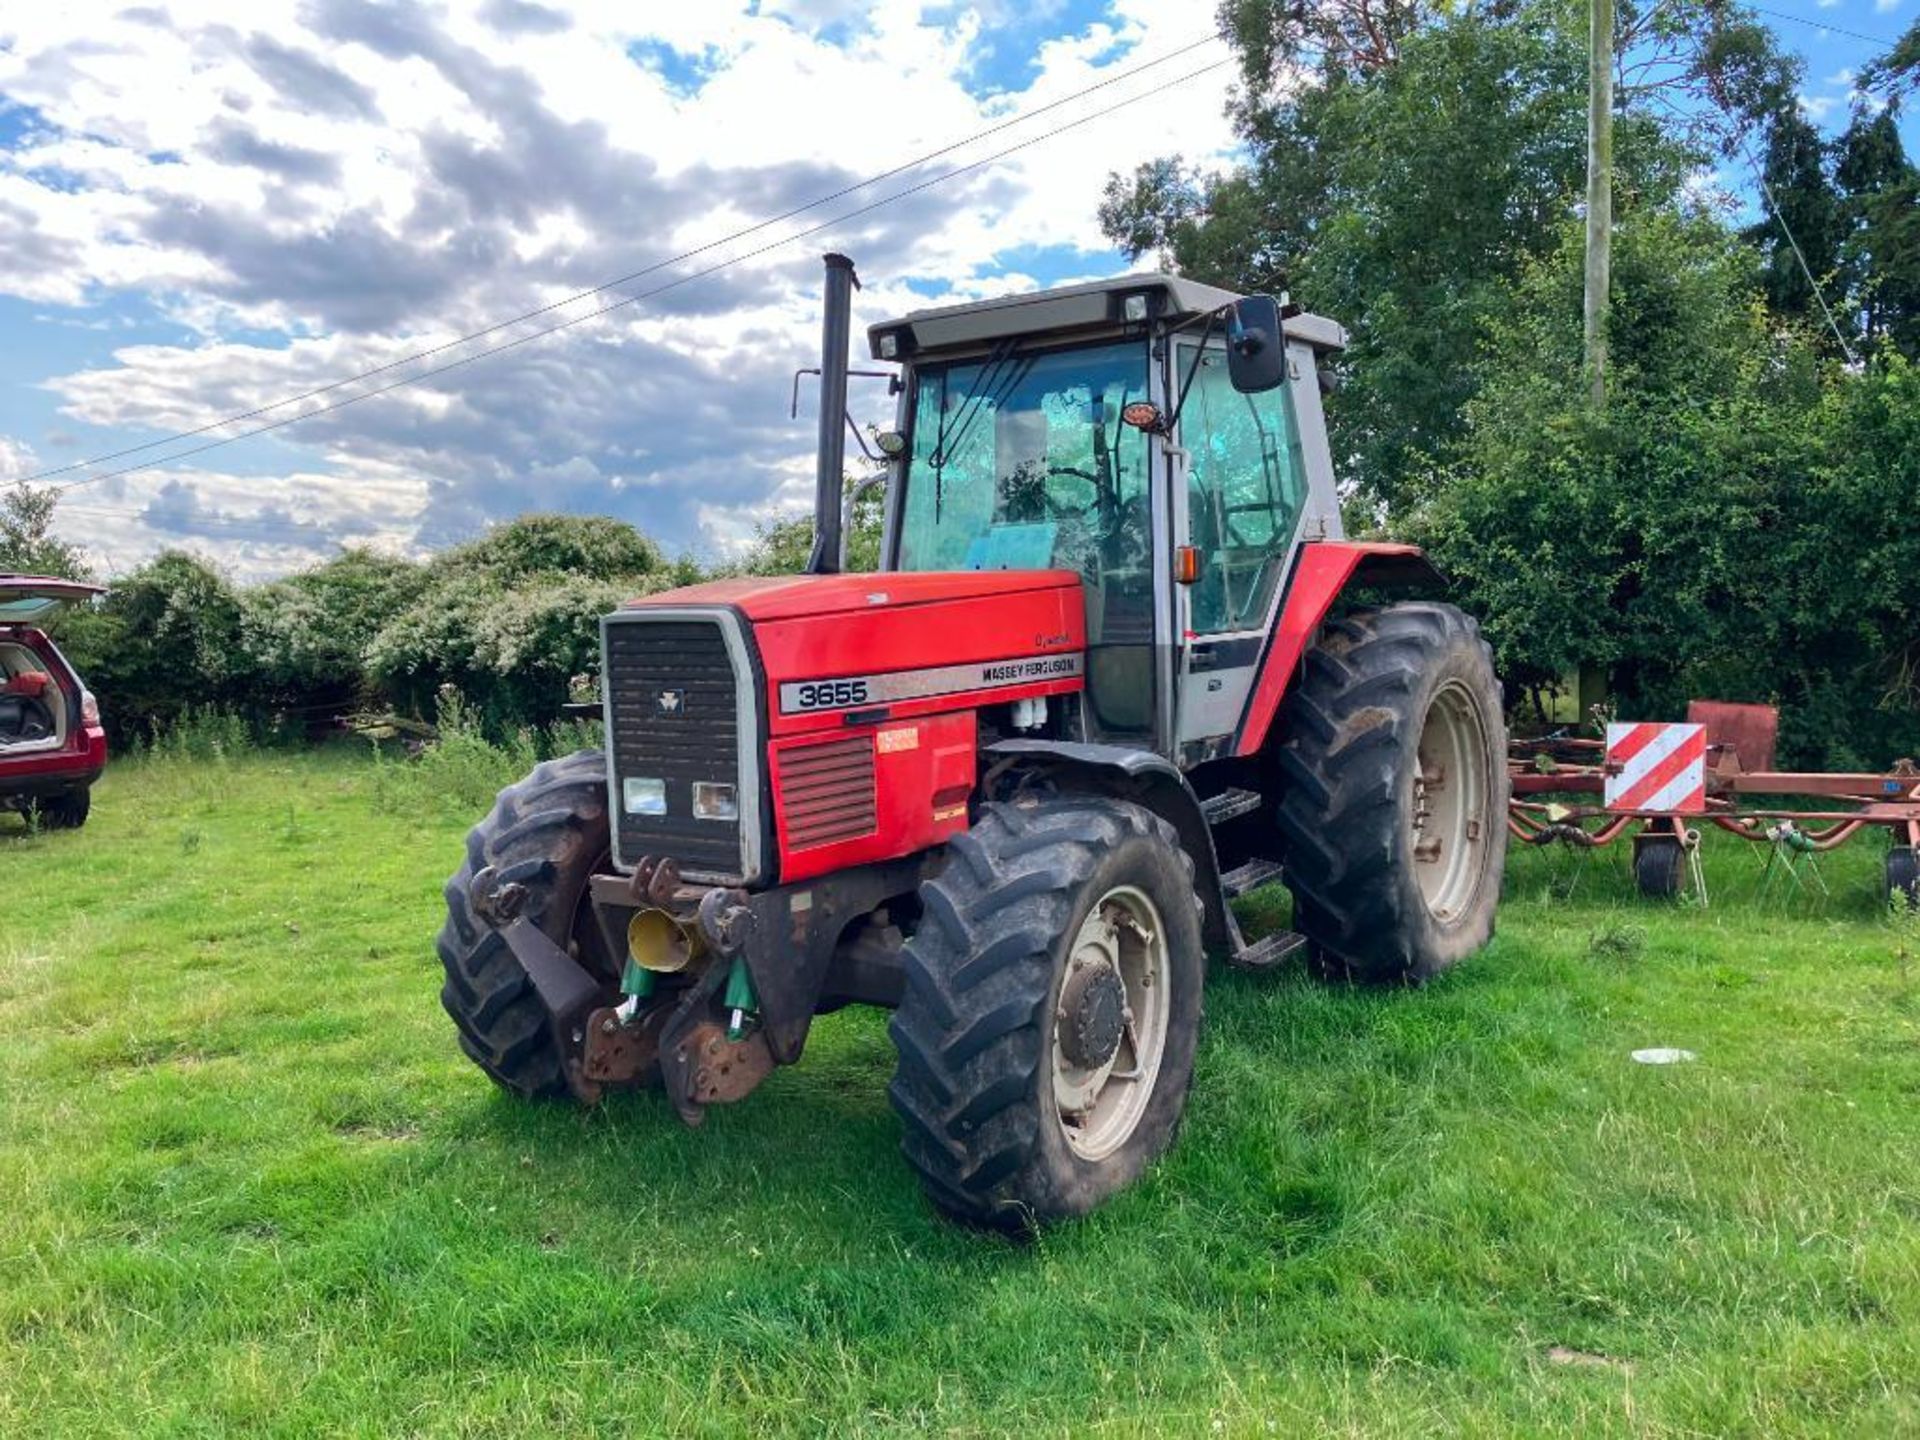 1995 Massey Ferguson 3655 Dynashift 4wd Datatronic tractor with 3 manual spools, front linkage and P - Image 17 of 23